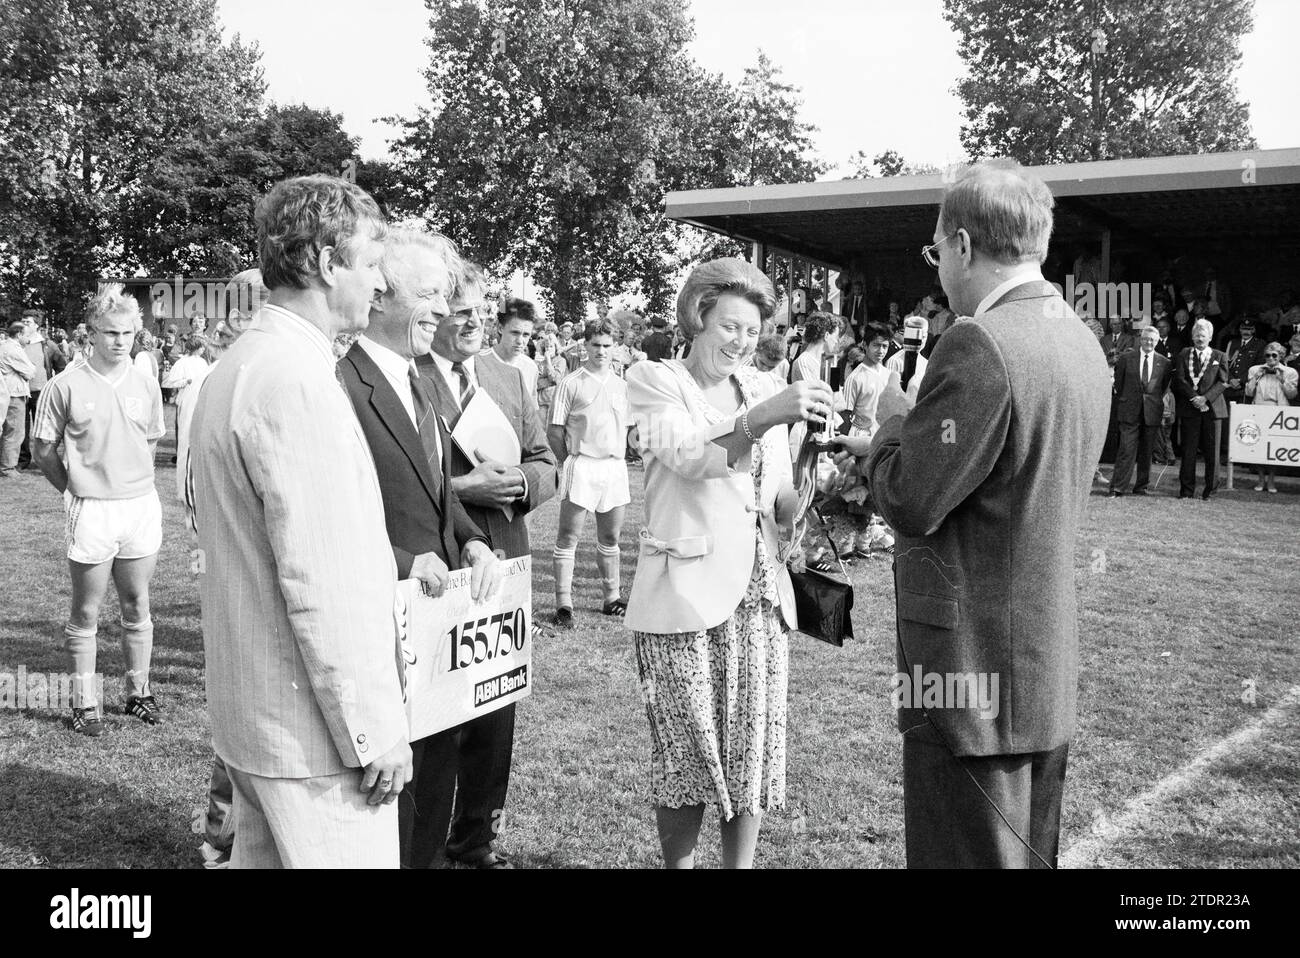 H.M. Beatrix at Swallow Tournament, Driehuis, Royal receptions and Royal visits, Sports and sports week, Driehuis, 09-09-1989, Whizgle News from the Past, Tailored for the Future. Explore historical narratives, Dutch The Netherlands agency image with a modern perspective, bridging the gap between yesterday's events and tomorrow's insights. A timeless journey shaping the stories that shape our future Stock Photo